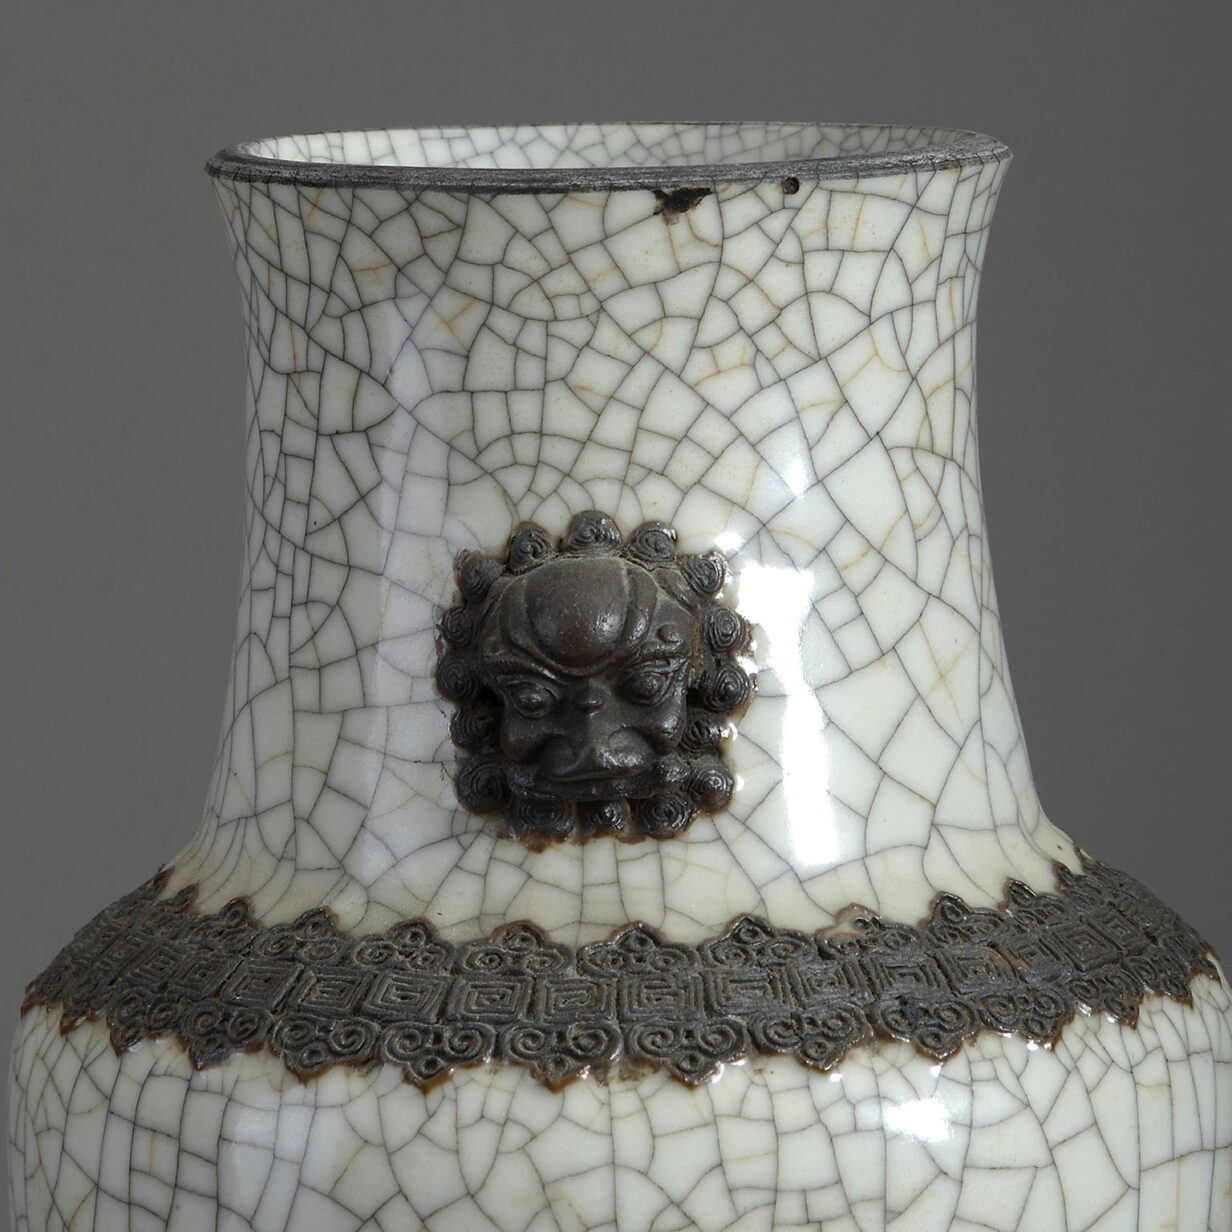 Late 19th century chinese export crackleware porcelain vase